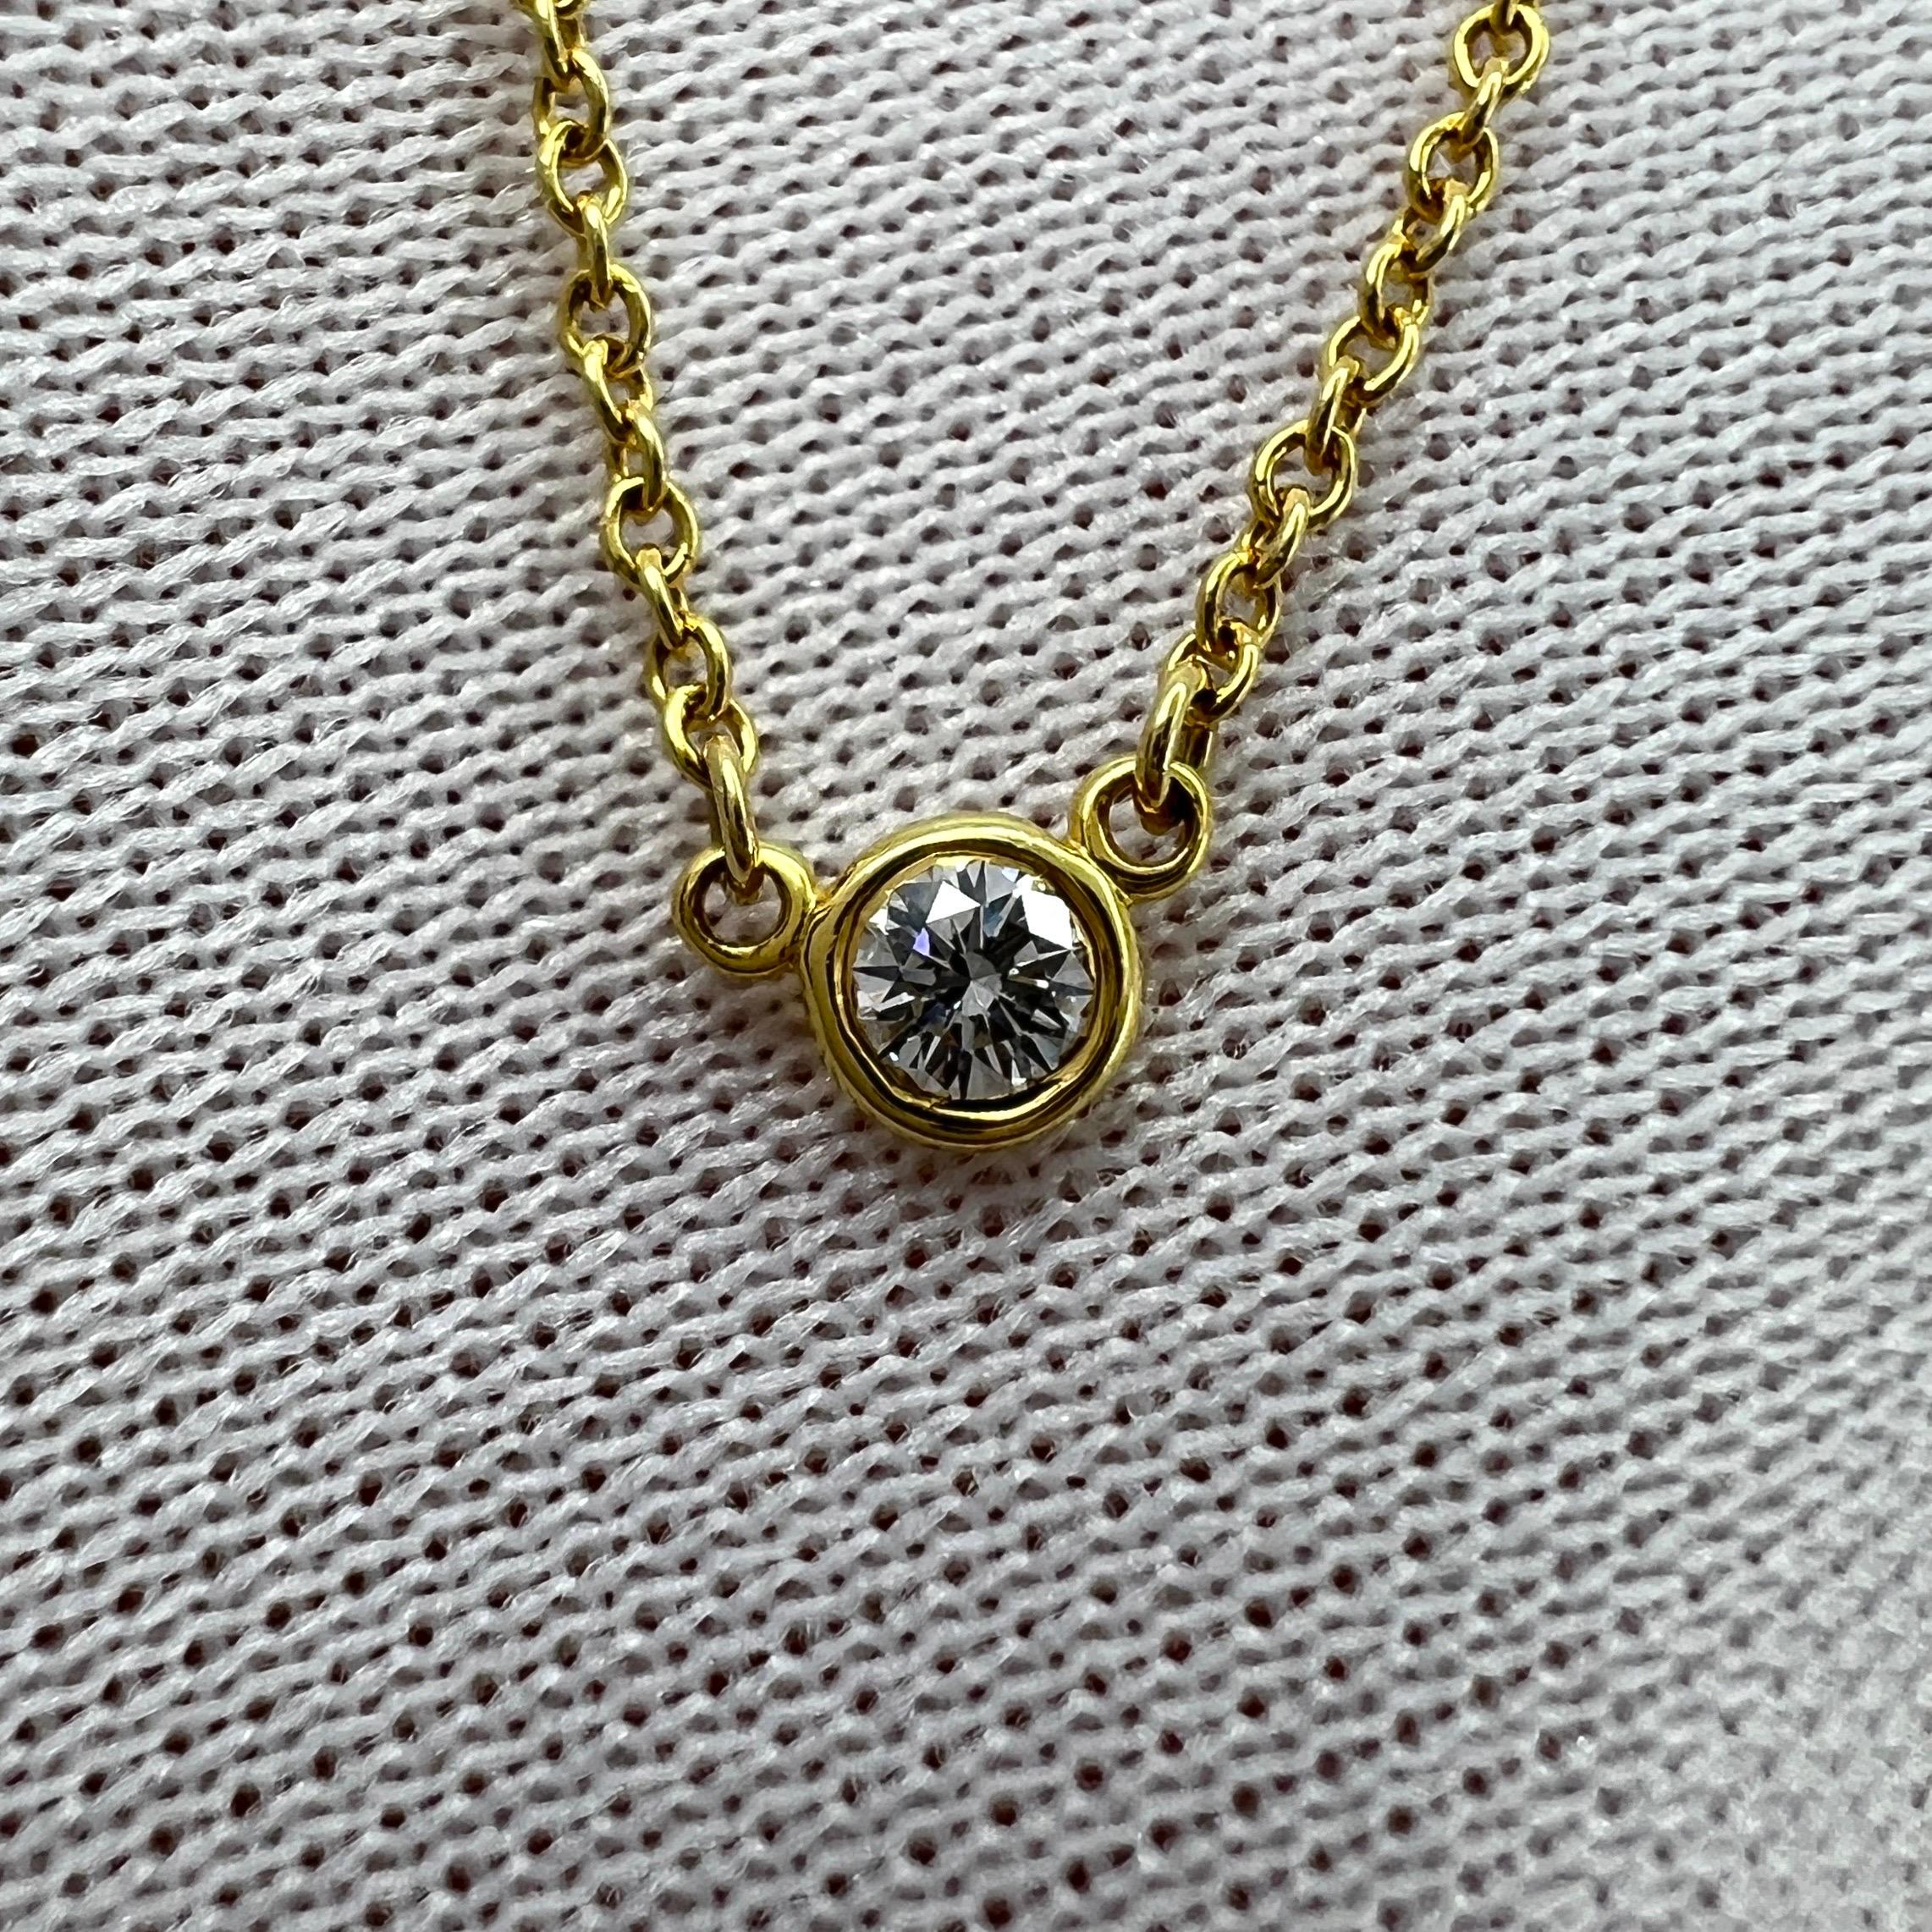 Vintage Tiffany & Co. Elsa Peretti By The Yard Round Diamond 18k Yellow Gold Necklace.

A beautiful 18k yellow gold pendant necklace set with a stunning round white diamond measuring 3.5mm.
A subtle and dainty necklace. Very much in trend right